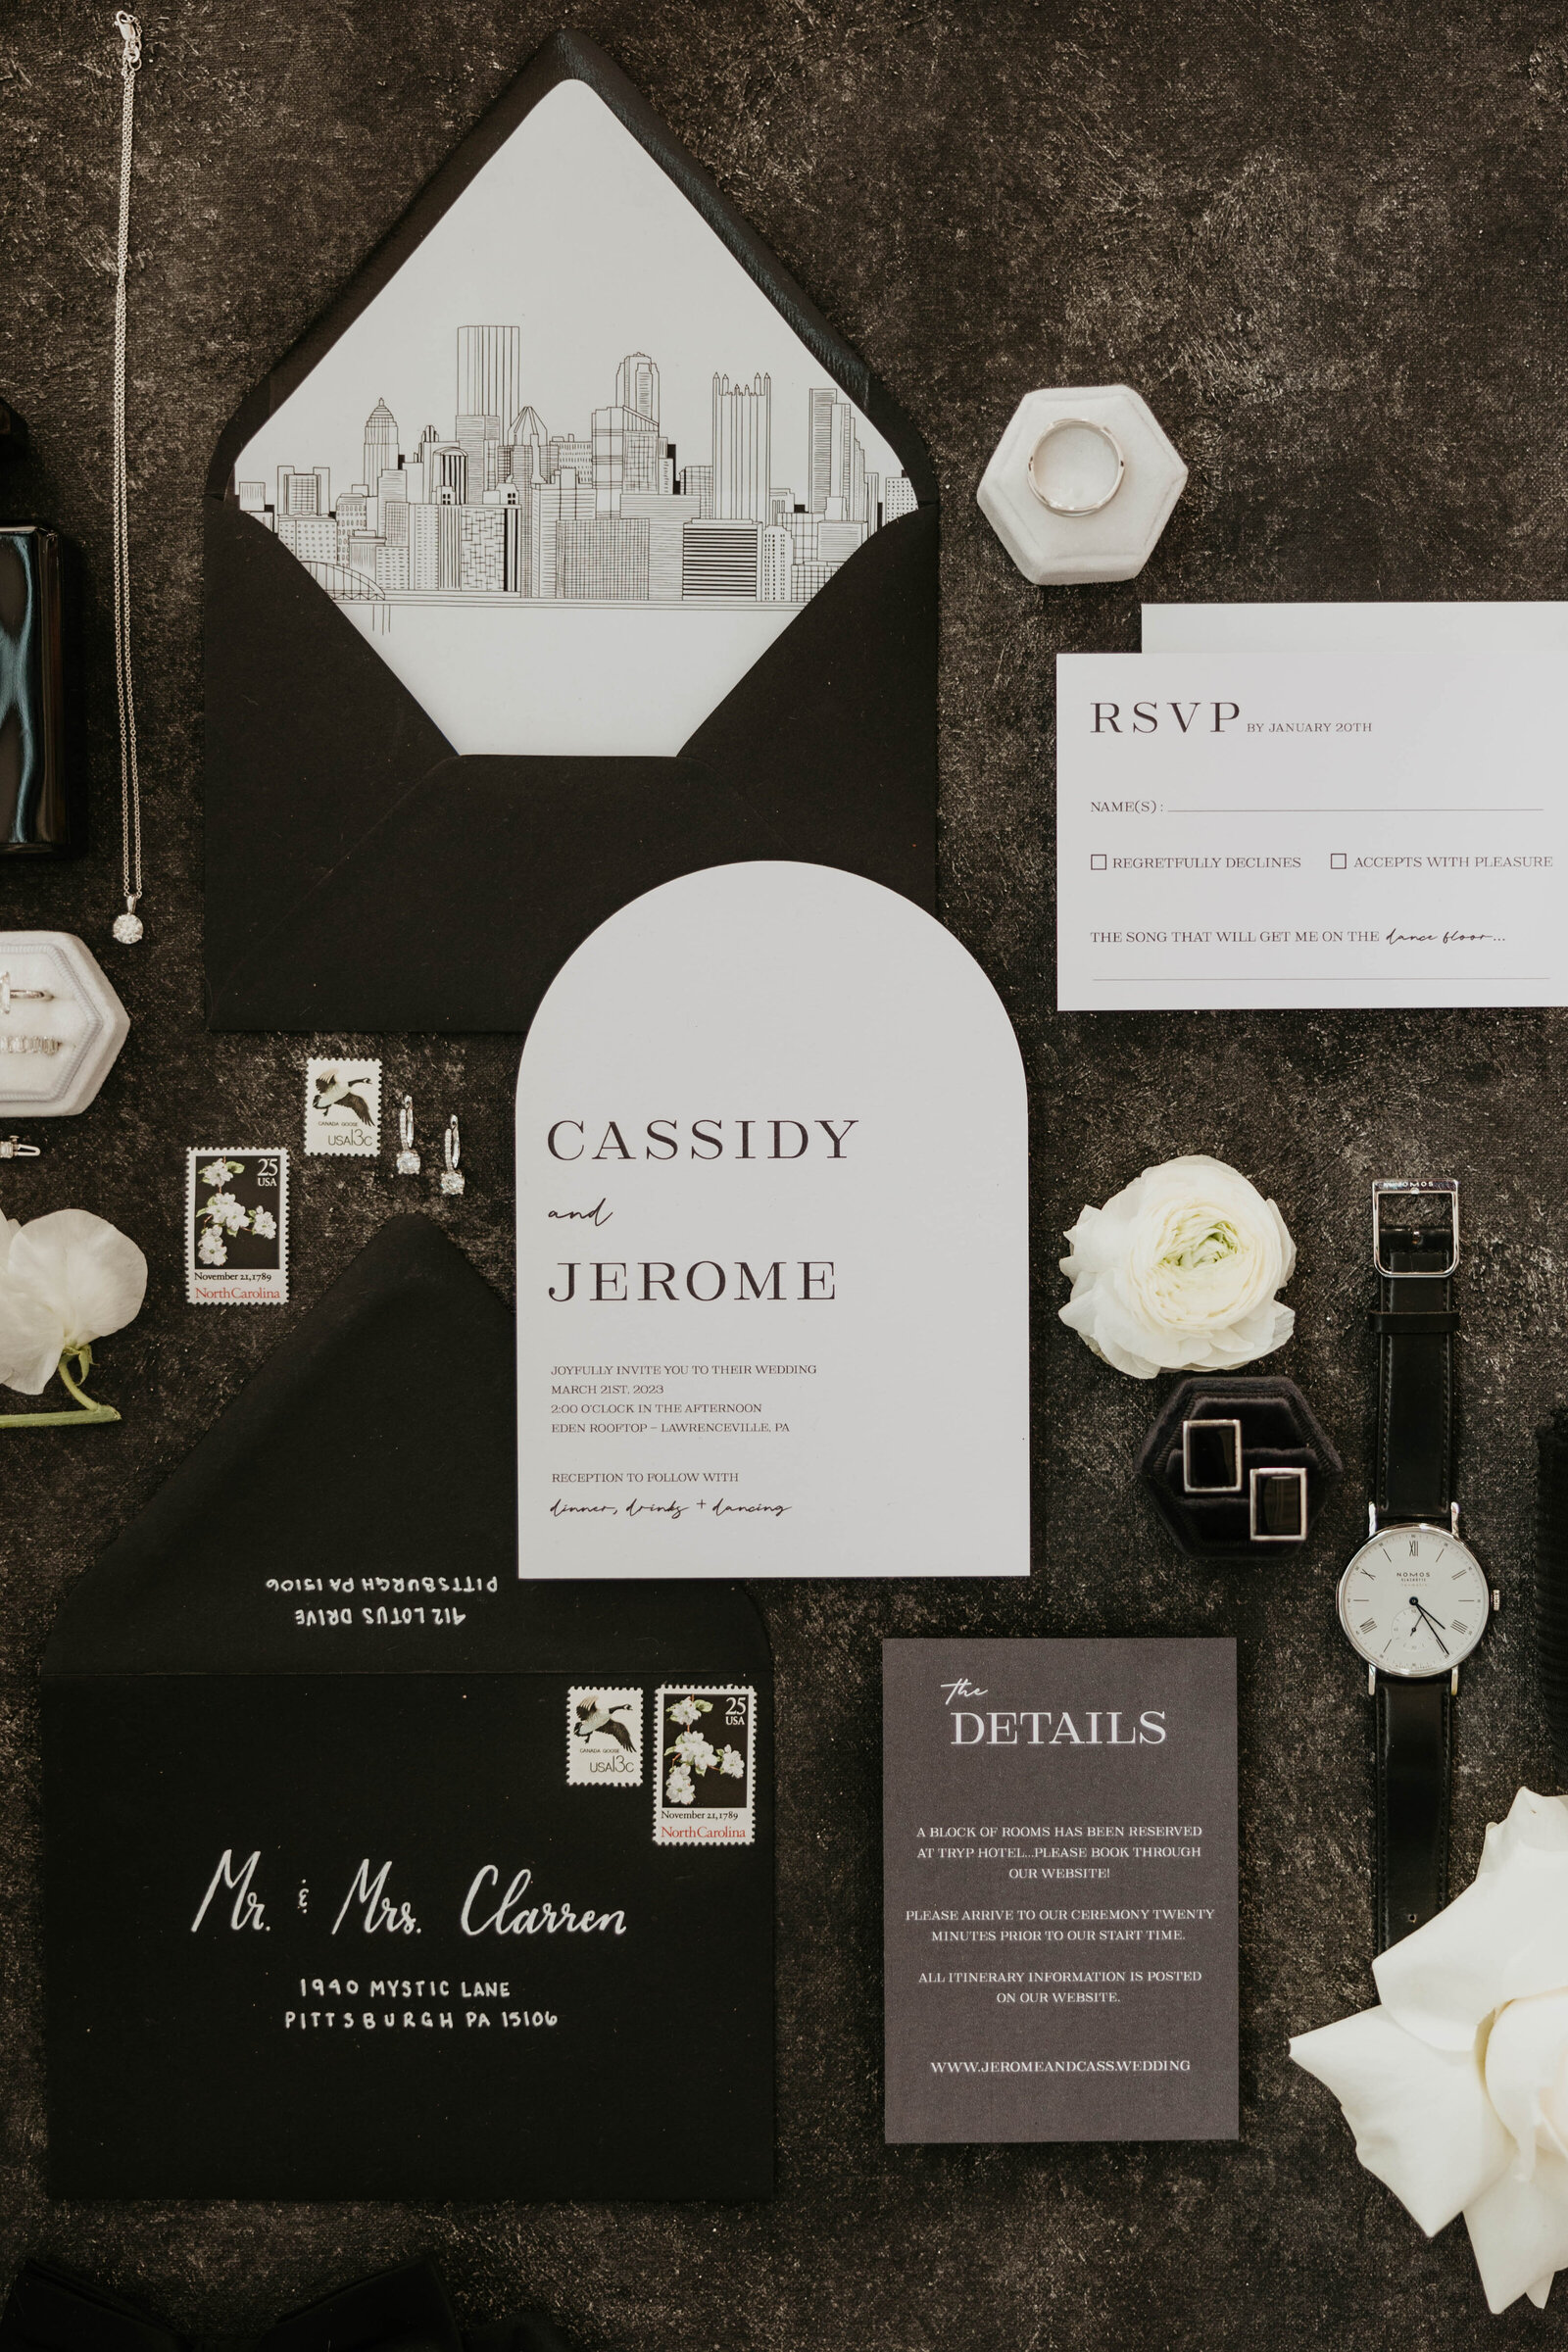 Discover the epitome of luxury with our exquisite black and white wedding invitation. Designed to complement your lavish celebration, this elegant and timeless design sets the tone for an unforgettable wedding. Contact our luxury wedding planning services for a seamless and opulent experience. Stunning black and white wedding invitation for luxury weddings - Perfect for elegant couples seeking timeless sophistication.